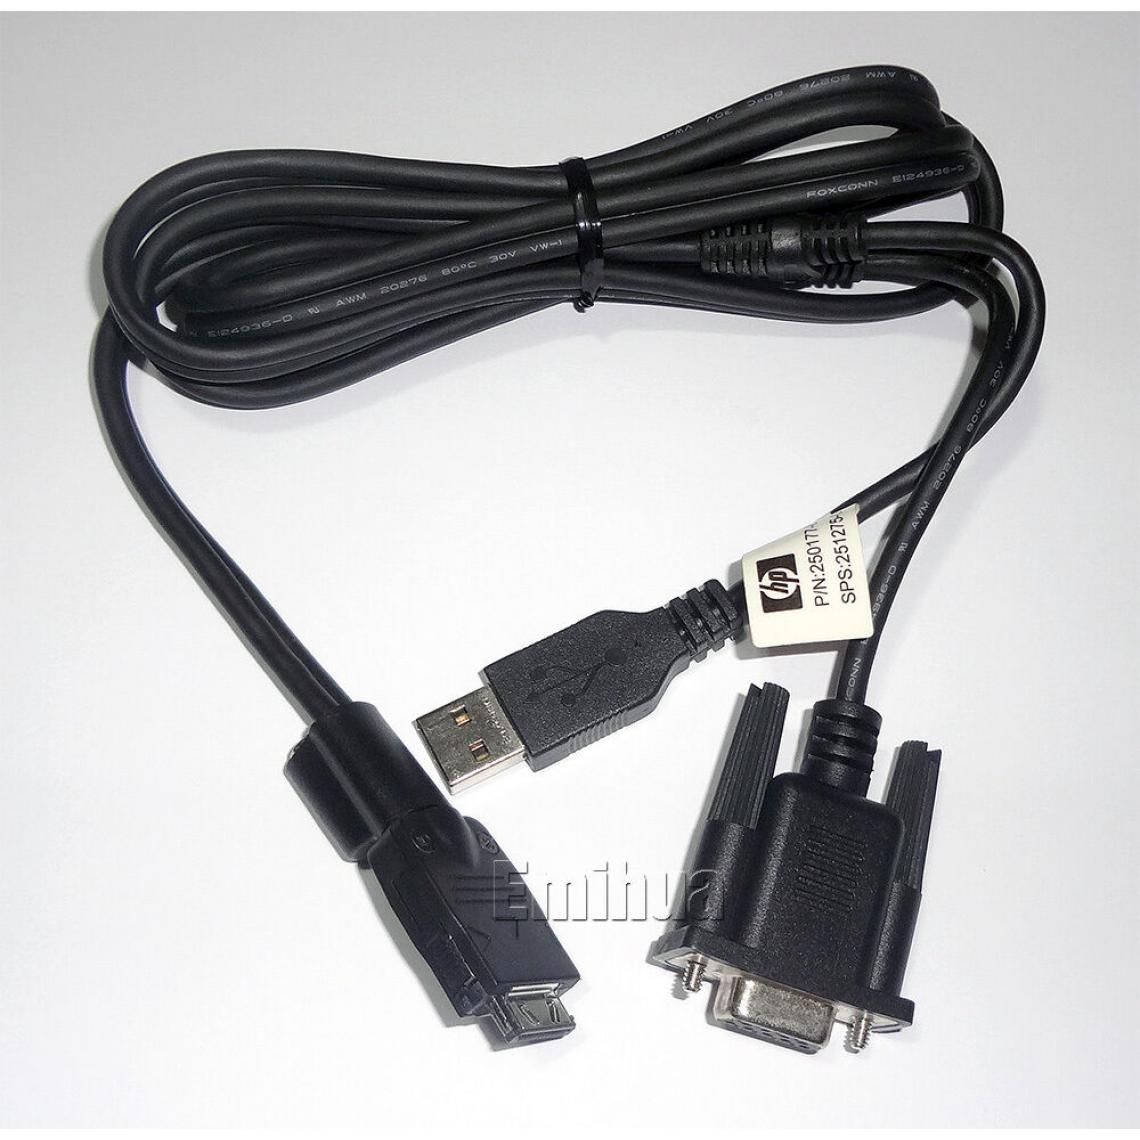 Hpe - 36PIN SUV DONGLE CORD KIT - Accessoires Téléphone Fixe